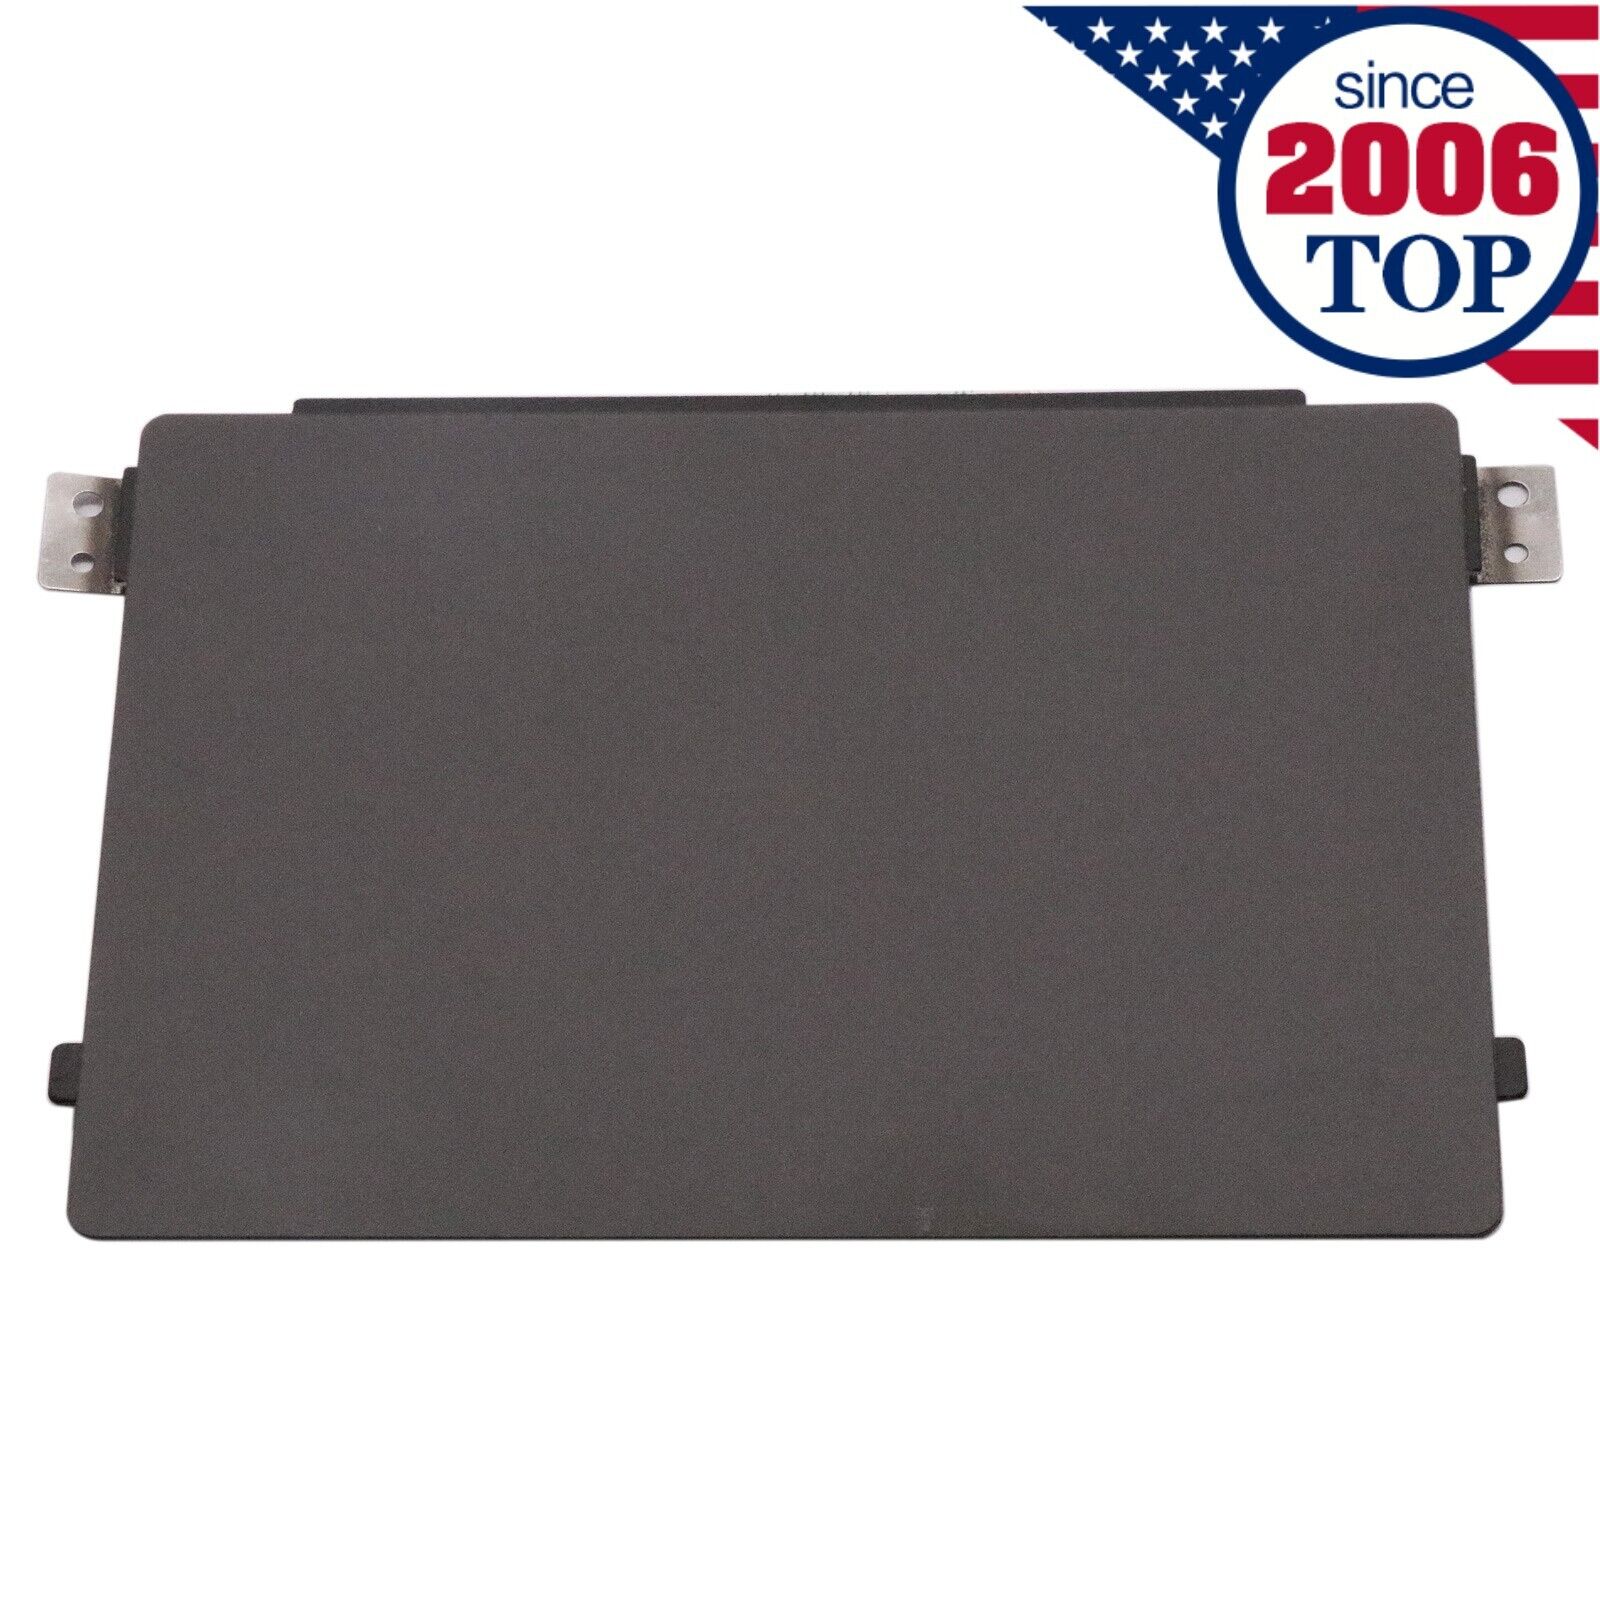 NEW Black Touchpad Module for Dell inspiron 15 7500 7506 5501 5502 5505 0JTTWY